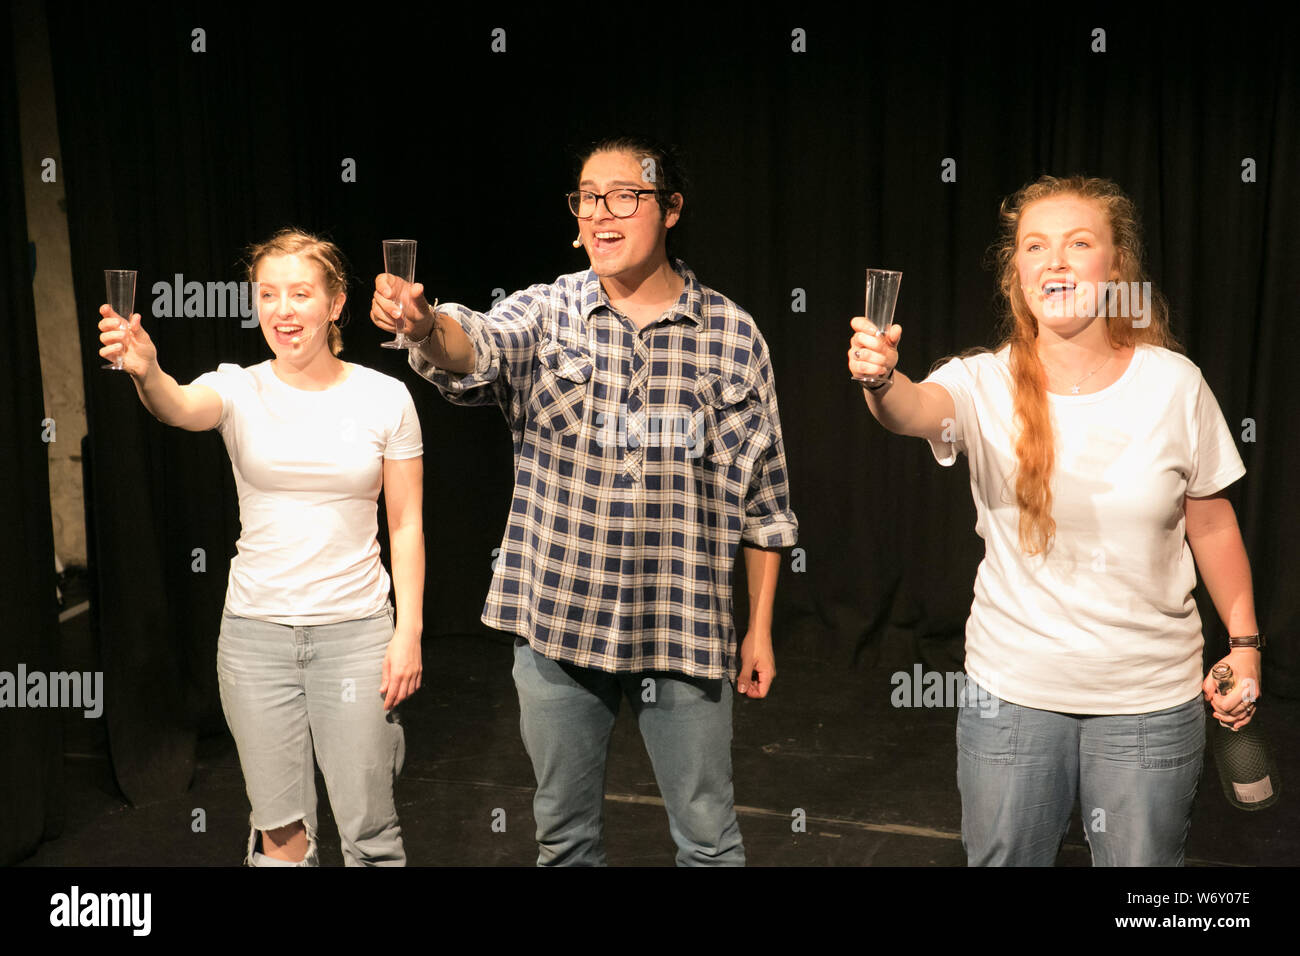 Edinburgh, Scotland, 3rd, August, 2019. Pictured L-R, Natalie Davies, Yitzin R Lopez, Emily Peach, performing Early Mornings - The Musical.  Credit: Brian Wilson/Alamy Live News. Stock Photo